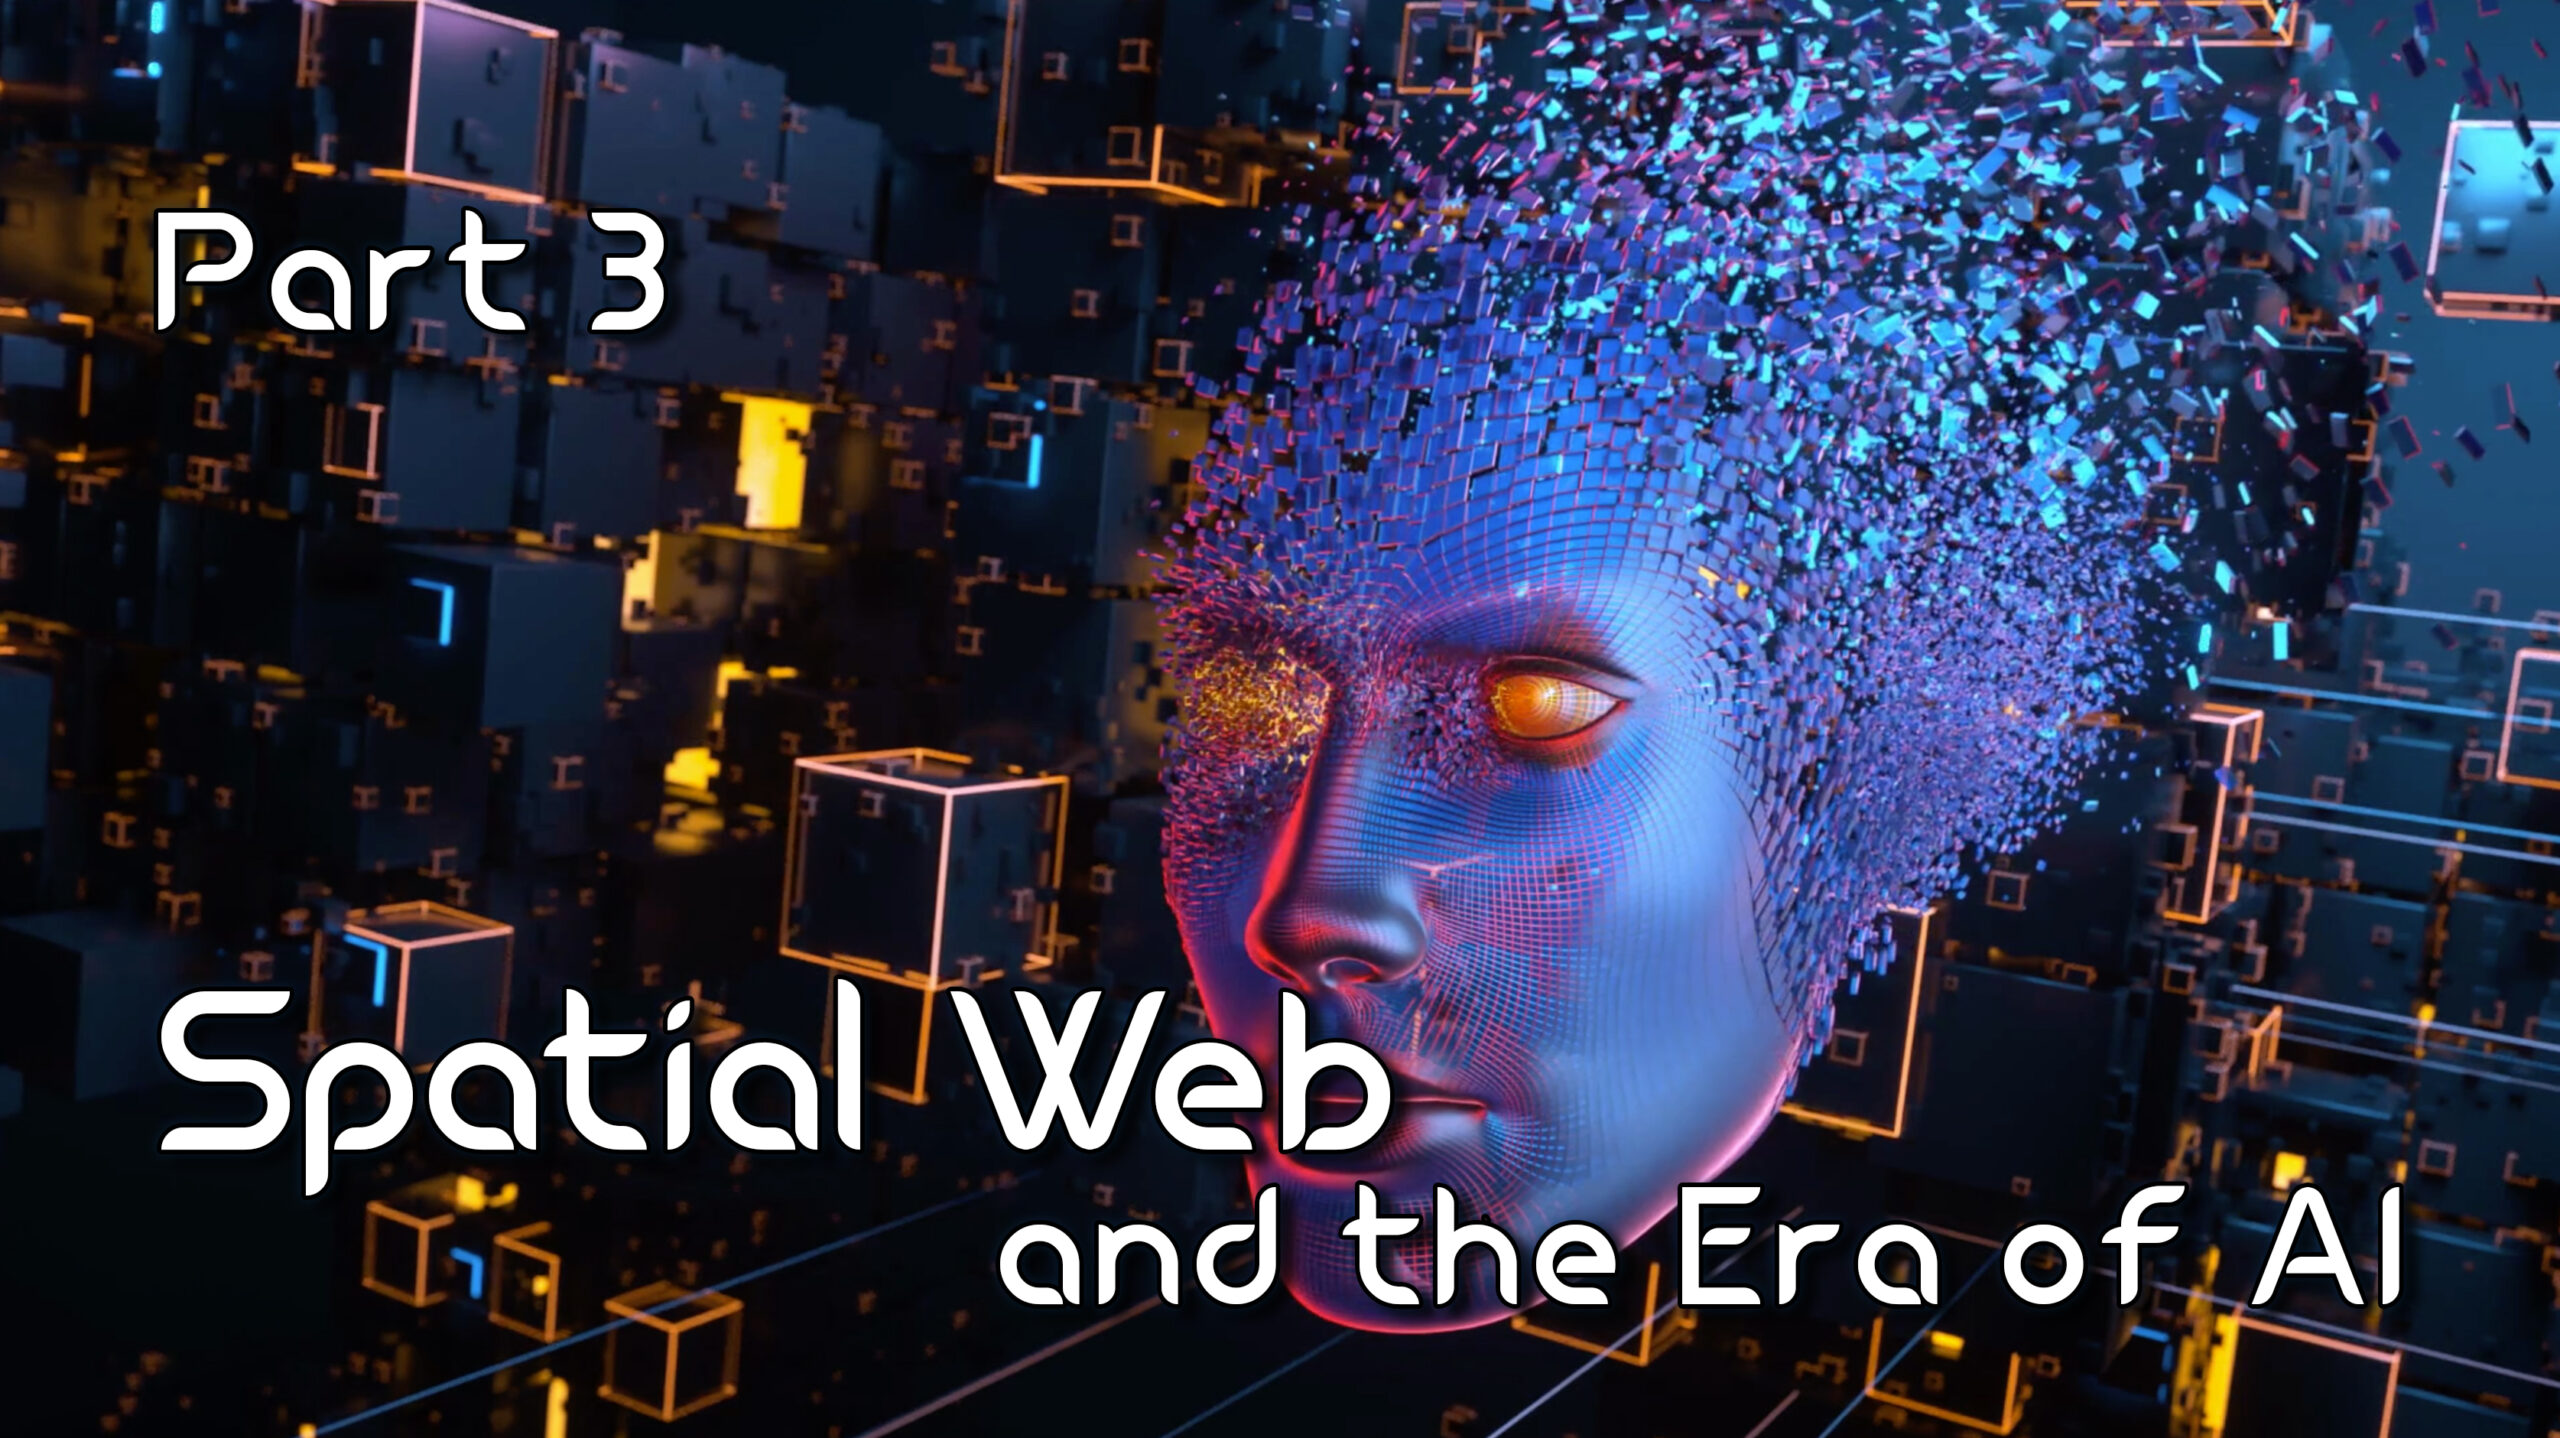 VERSES KOSM™ OS Slashes Developer Barrier to Entry for Building AI Apps – Spatial Web and the Era of AI  – Part 3